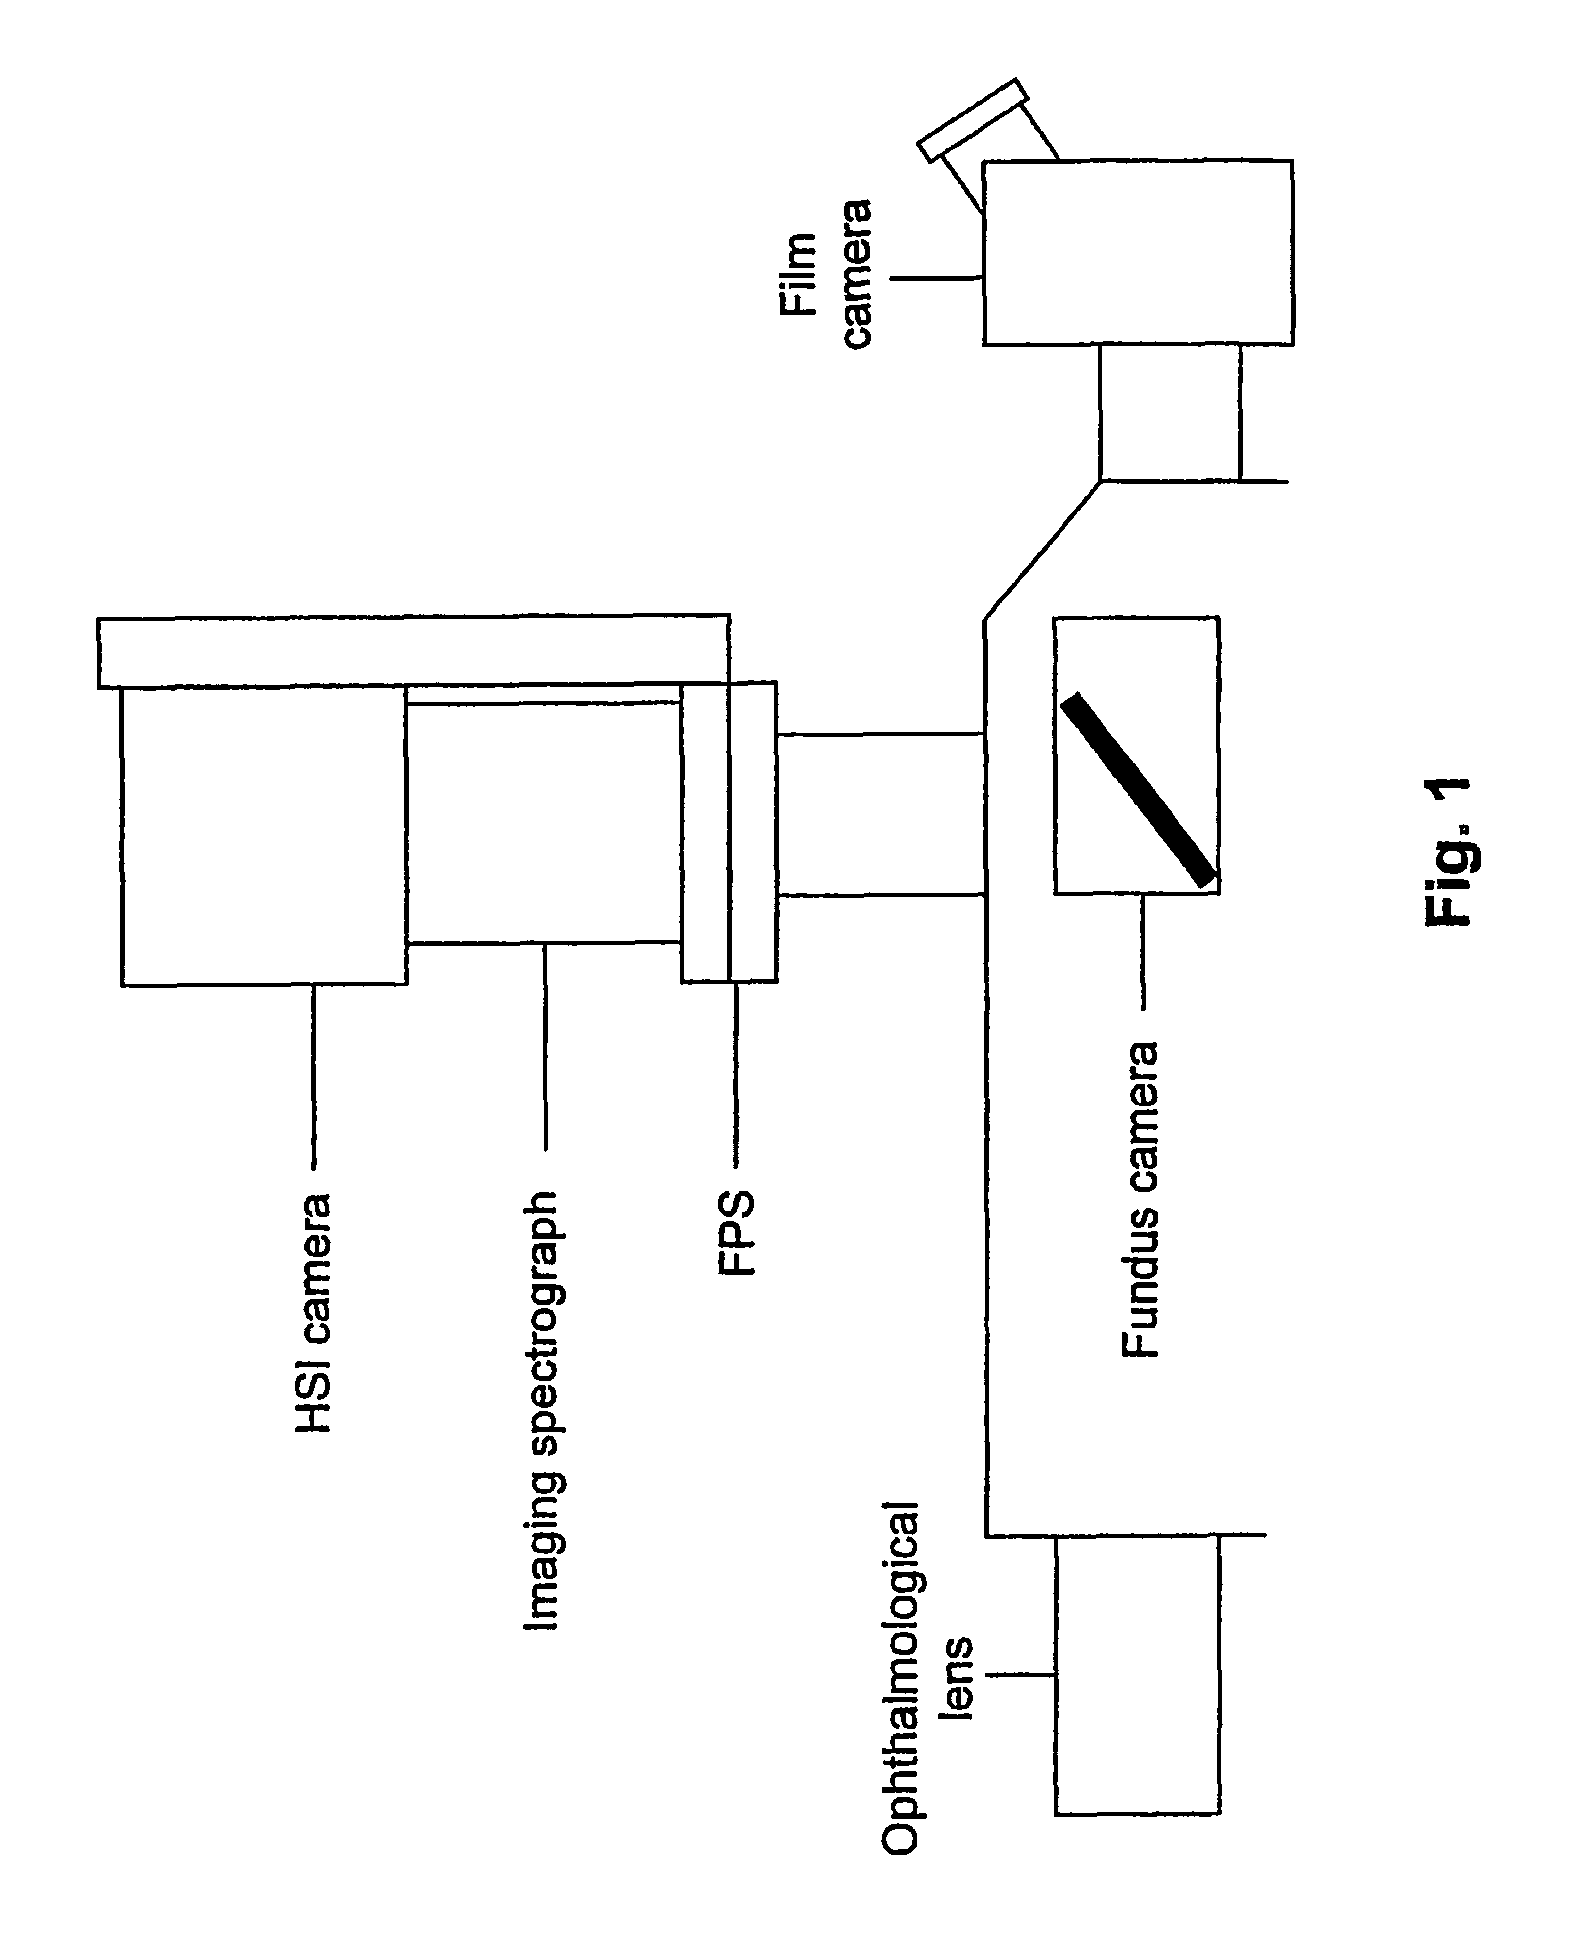 Method for evaluating relative oxygen saturation in body tissues